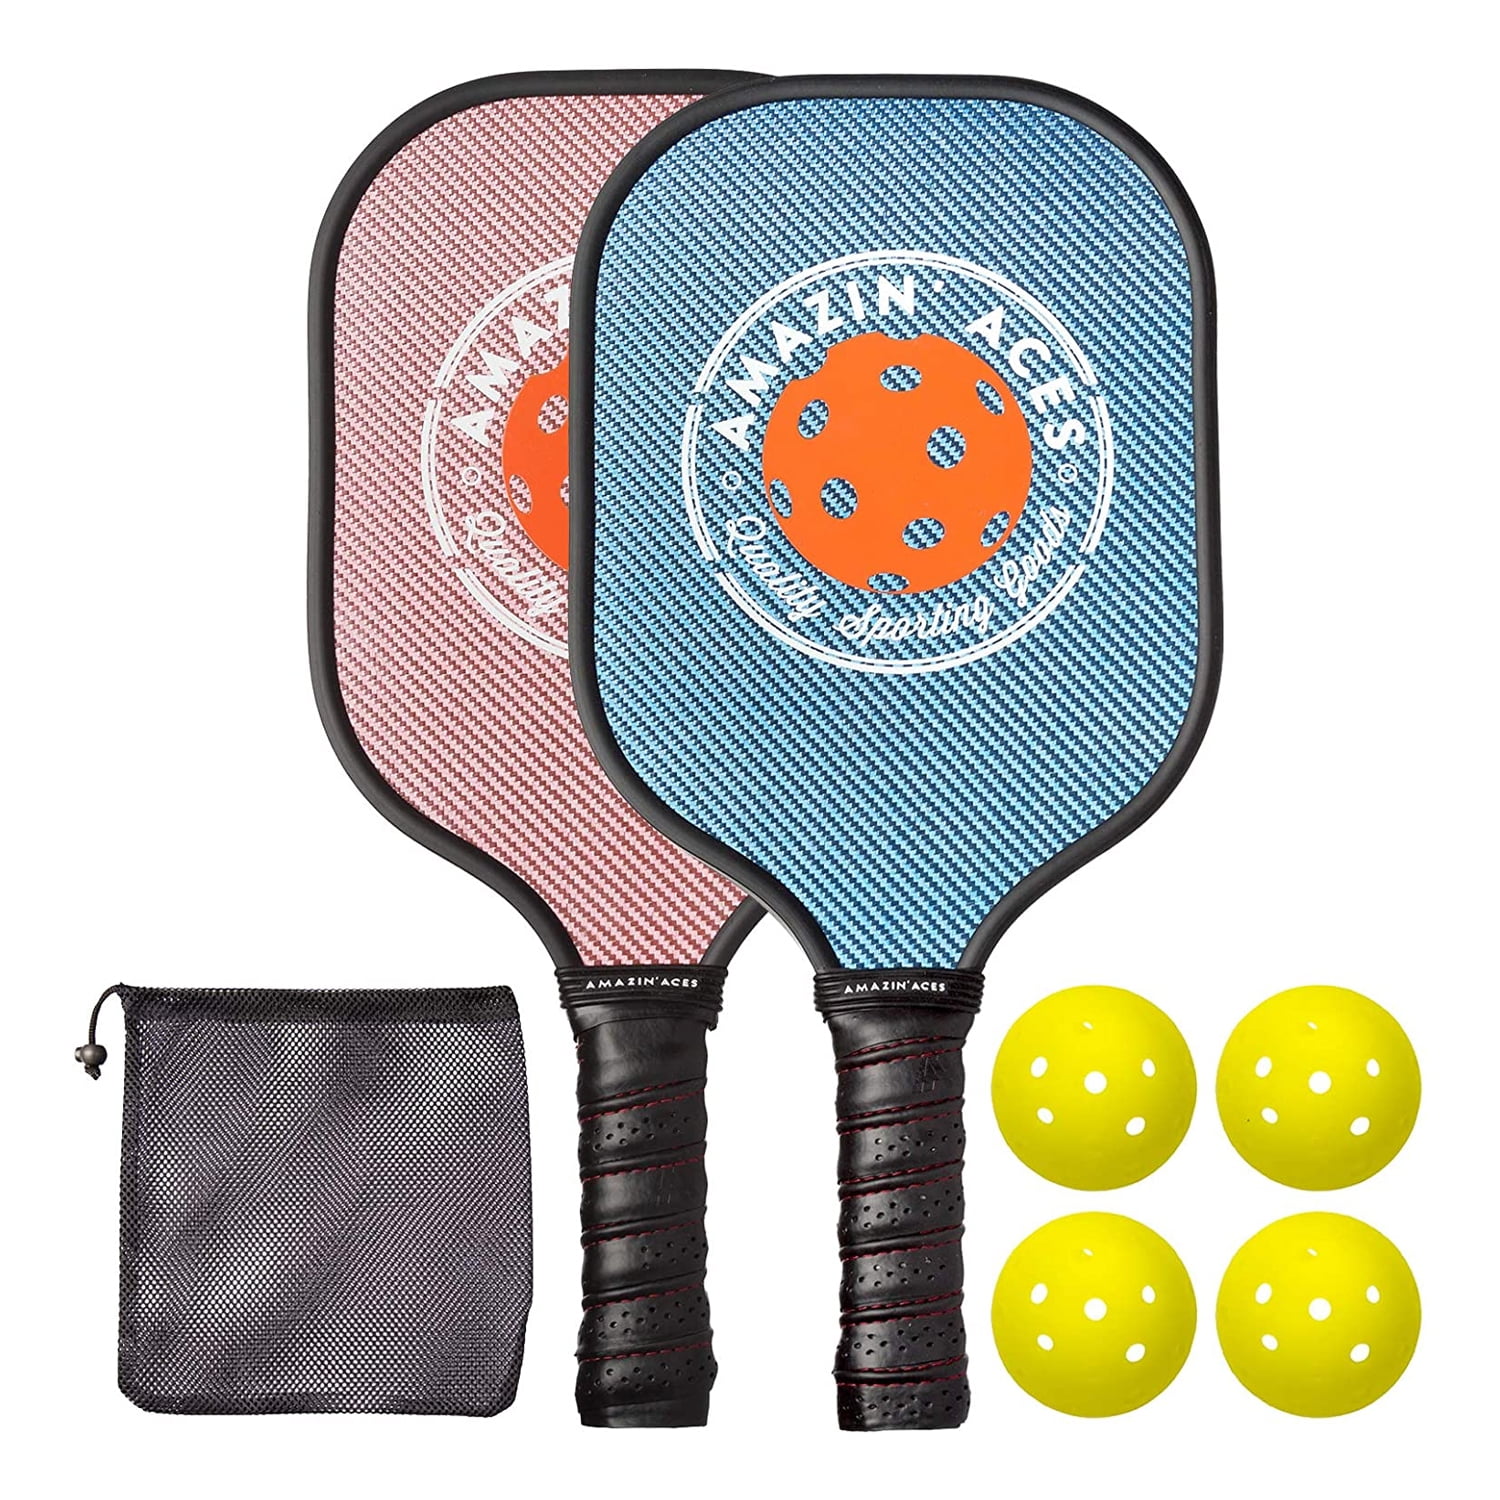 and 4 Balls Amazin Aces Pickleball Set with 2 Graphite Face Paddles For Parts 